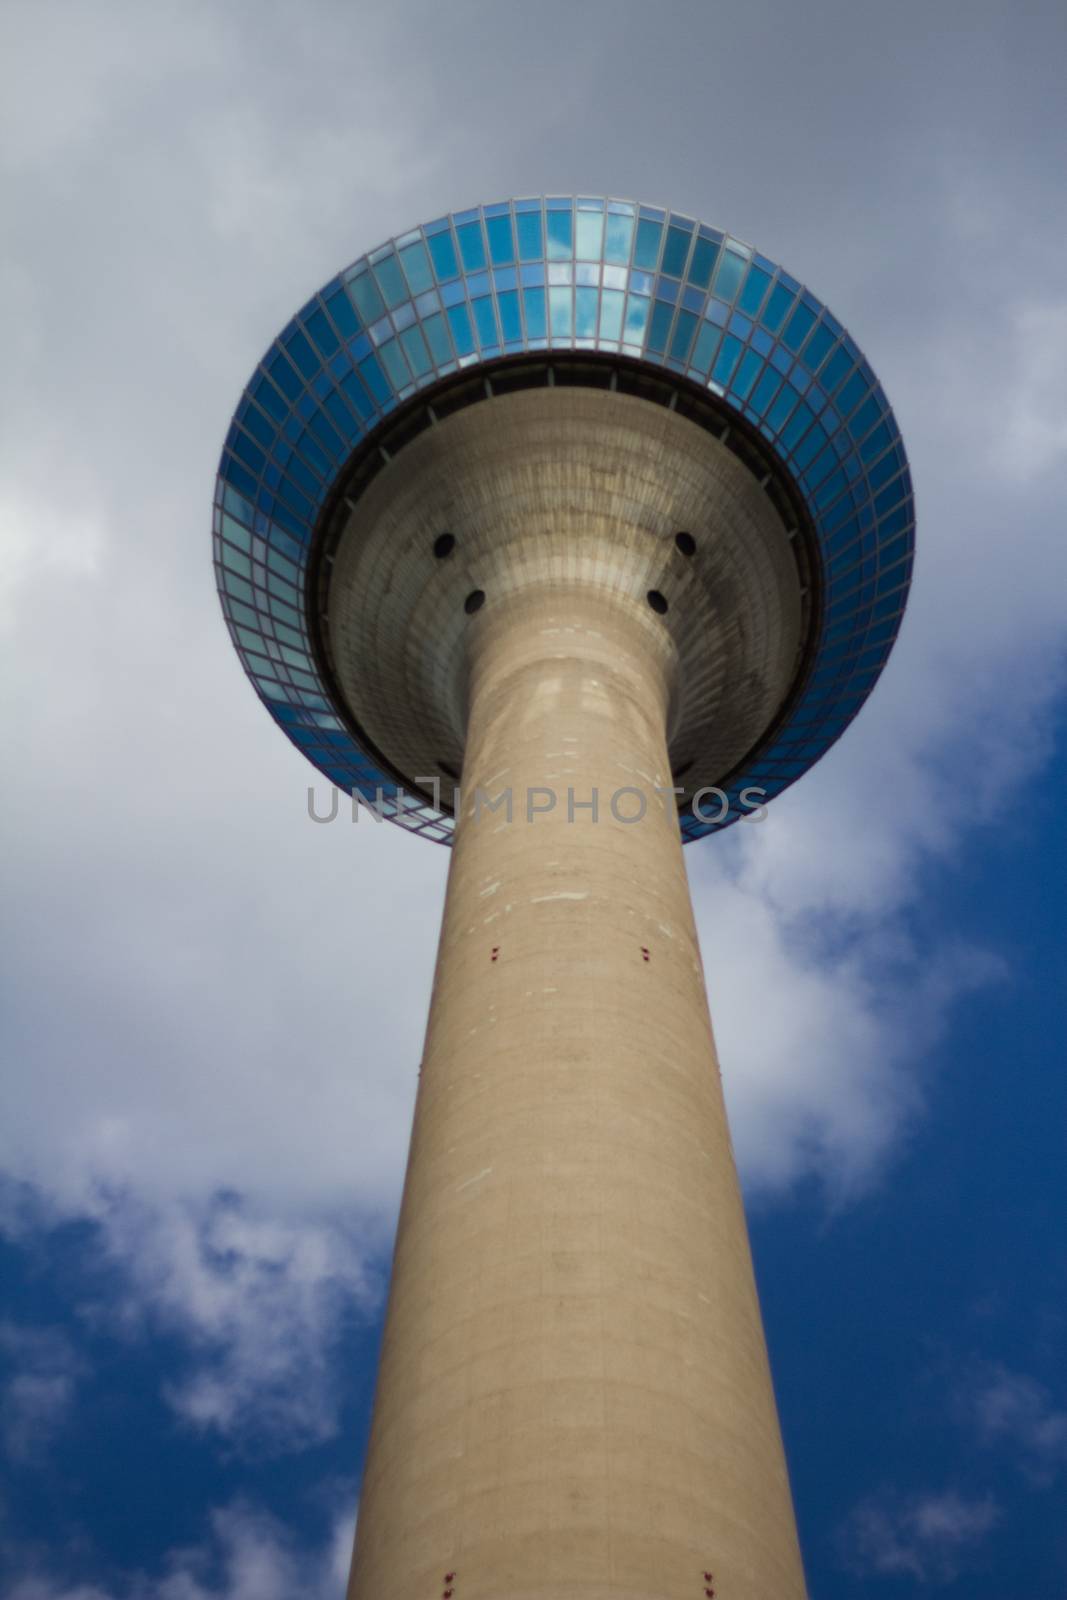 A Sky Tower in Germany